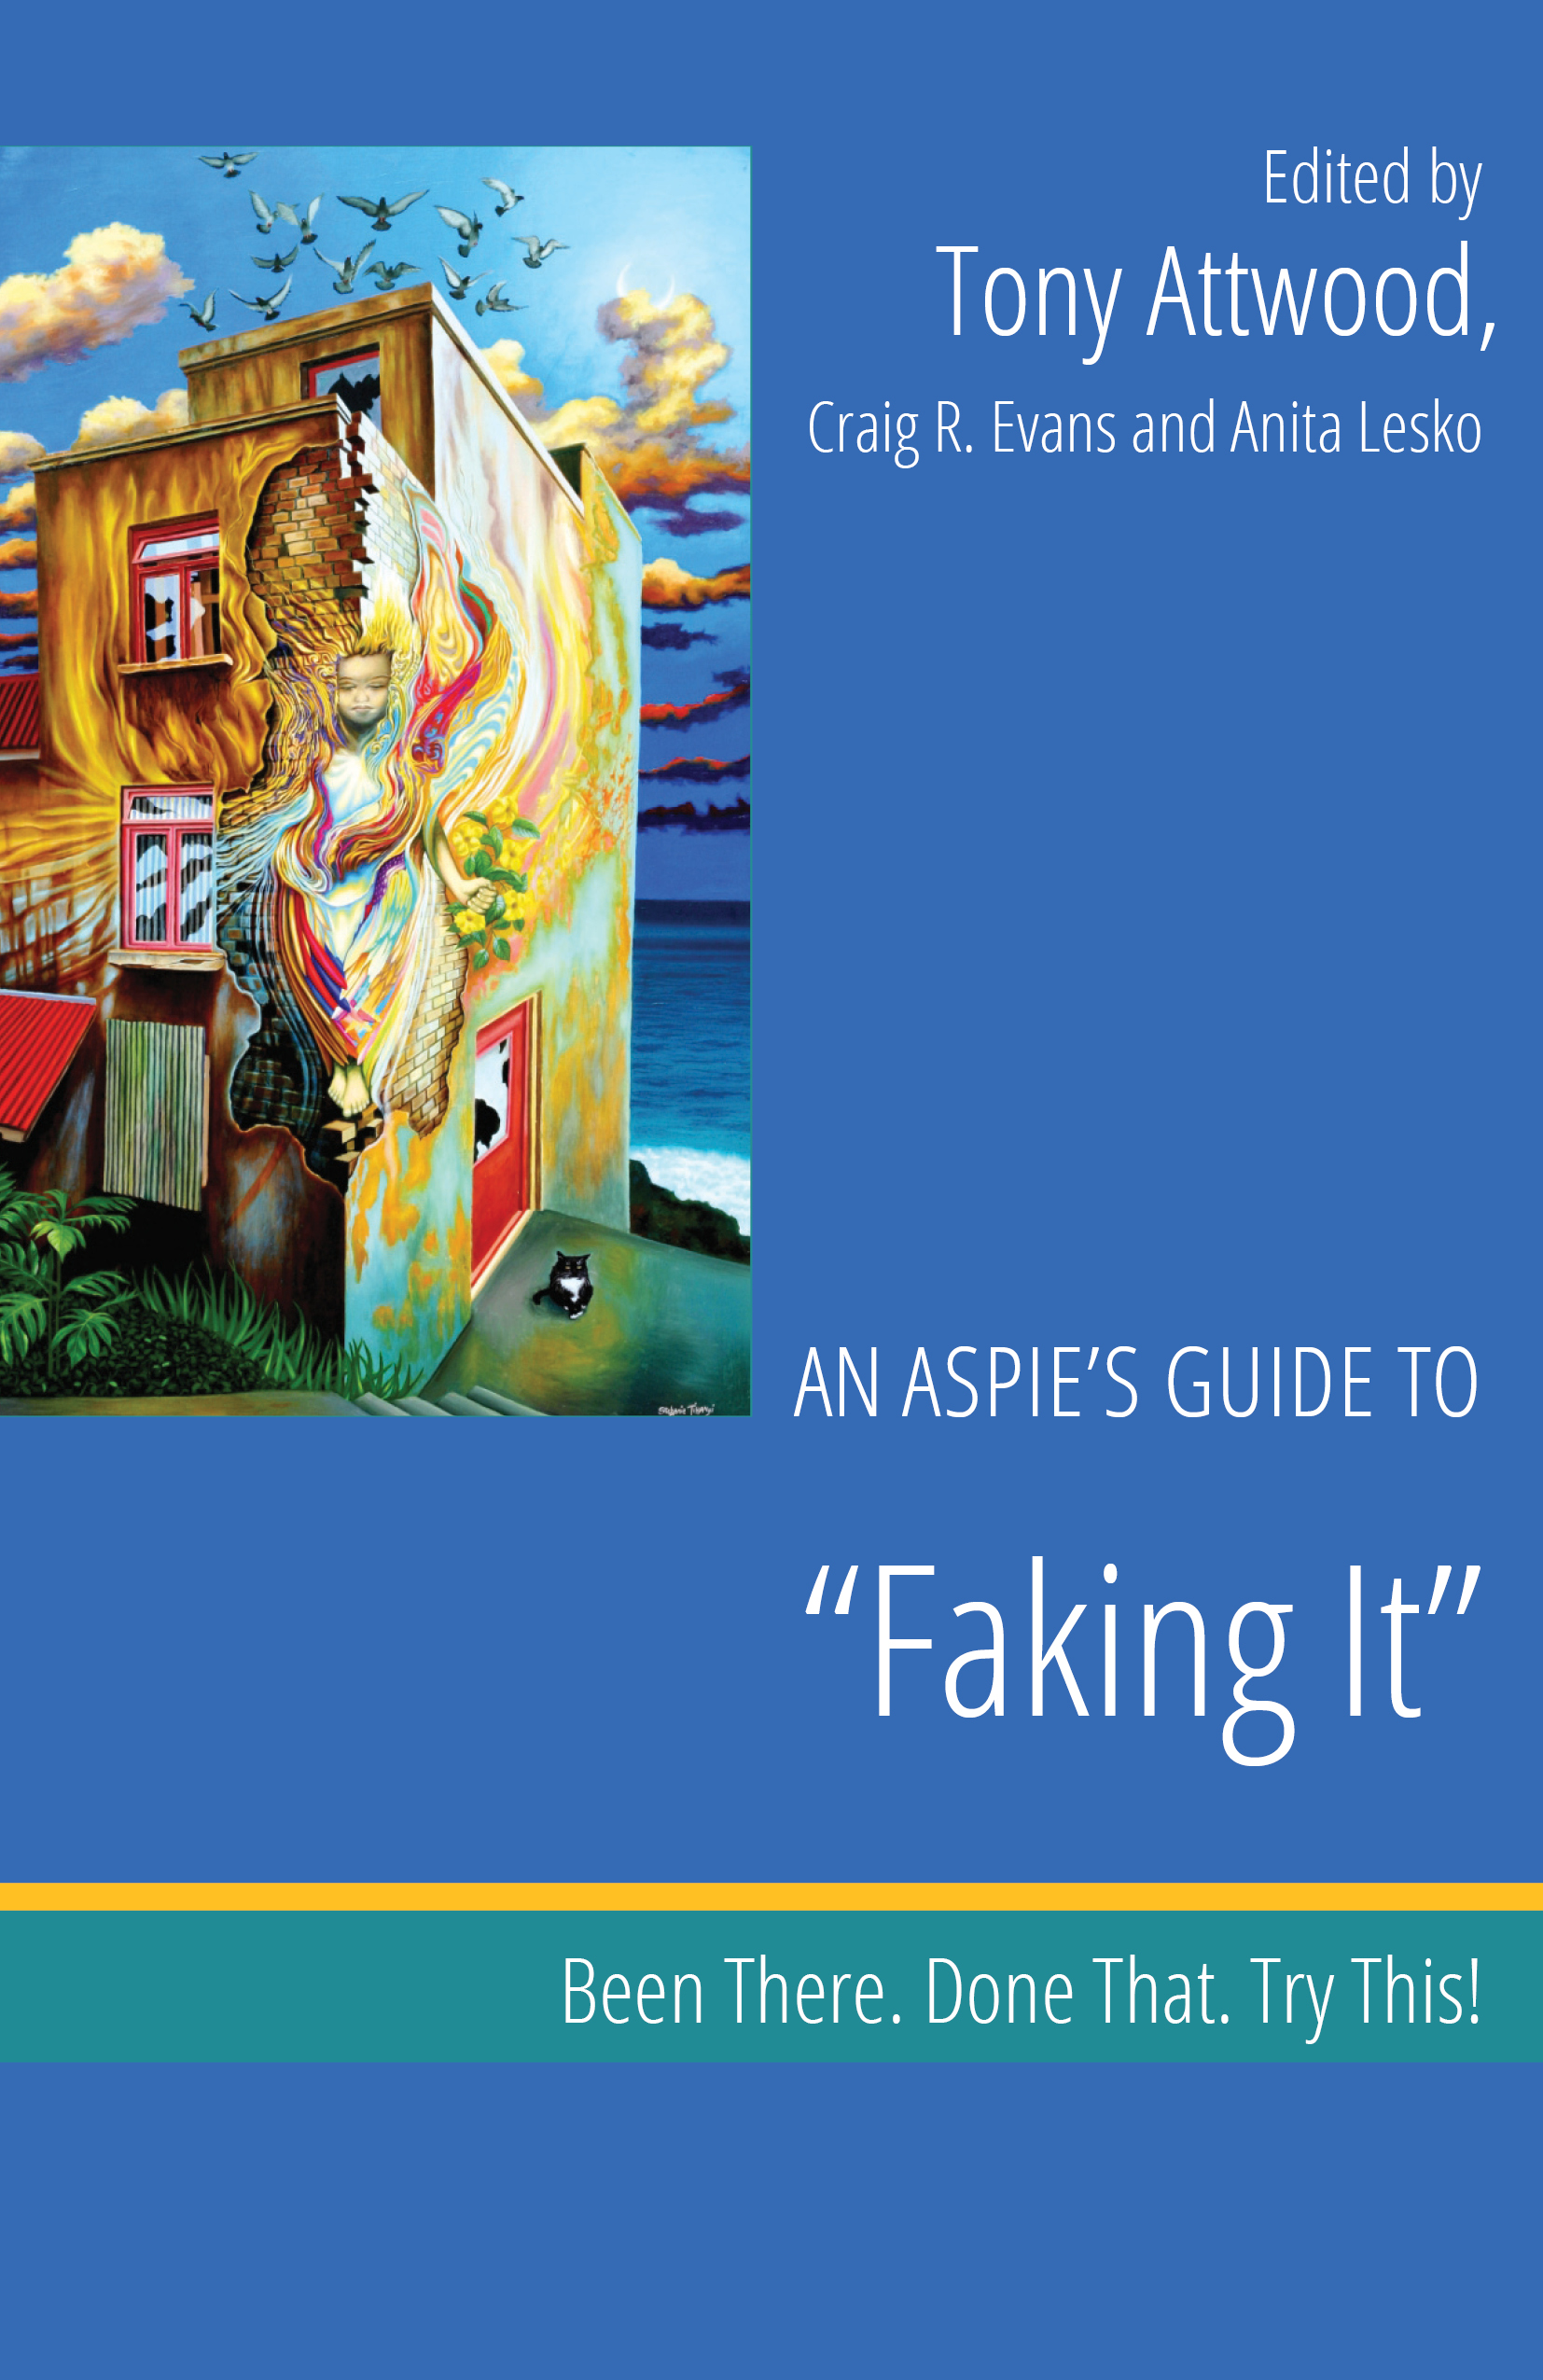 An Aspie's Guide to Faking It